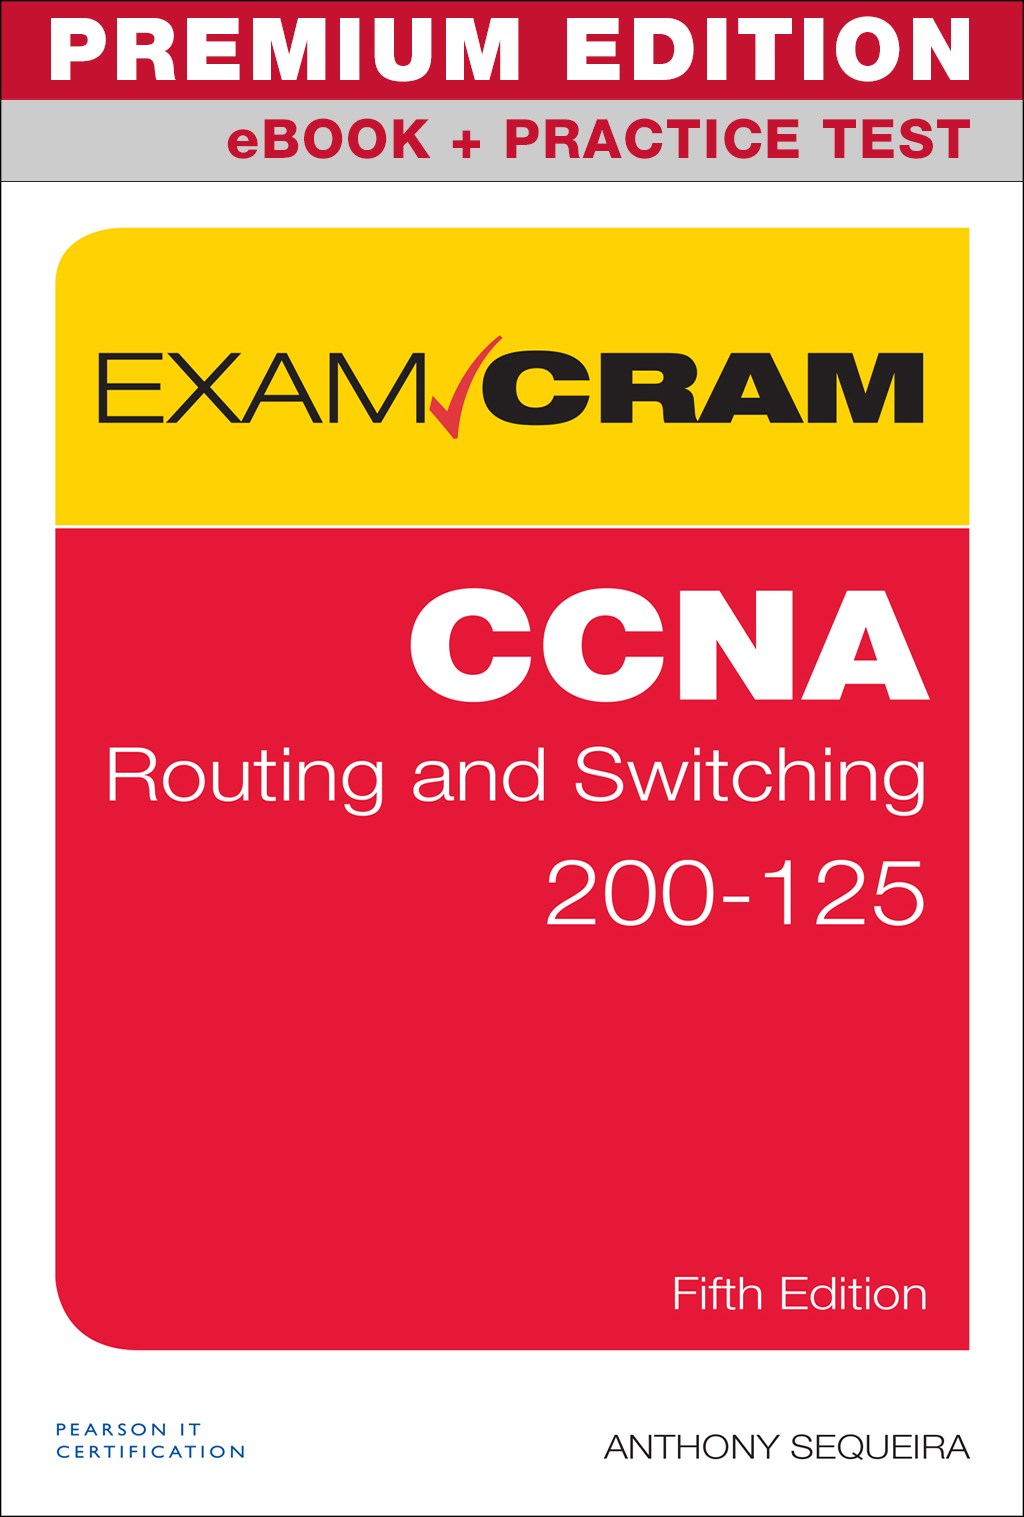 CCNA Routing and Switching 200-125 Exam Cram Premium Edition and Practice Test, 5th Edition